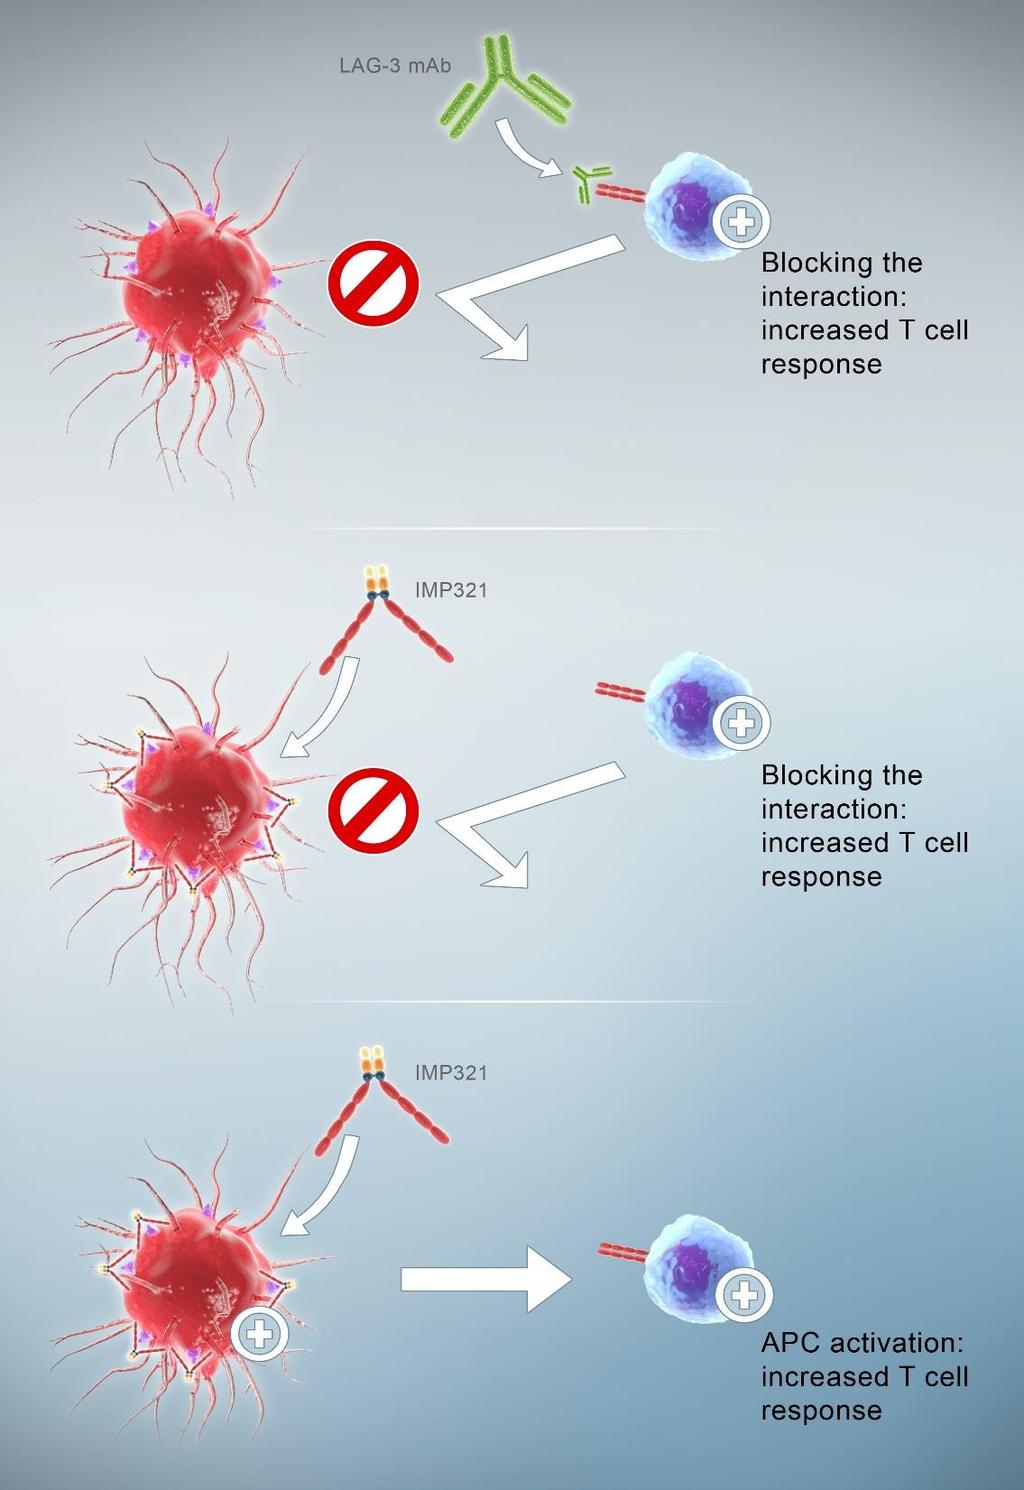 LAG-3 Mechanisms LAG-3 blocking mab: the typical immune checkpoint inhibitor LAG-3Ig fusion protein